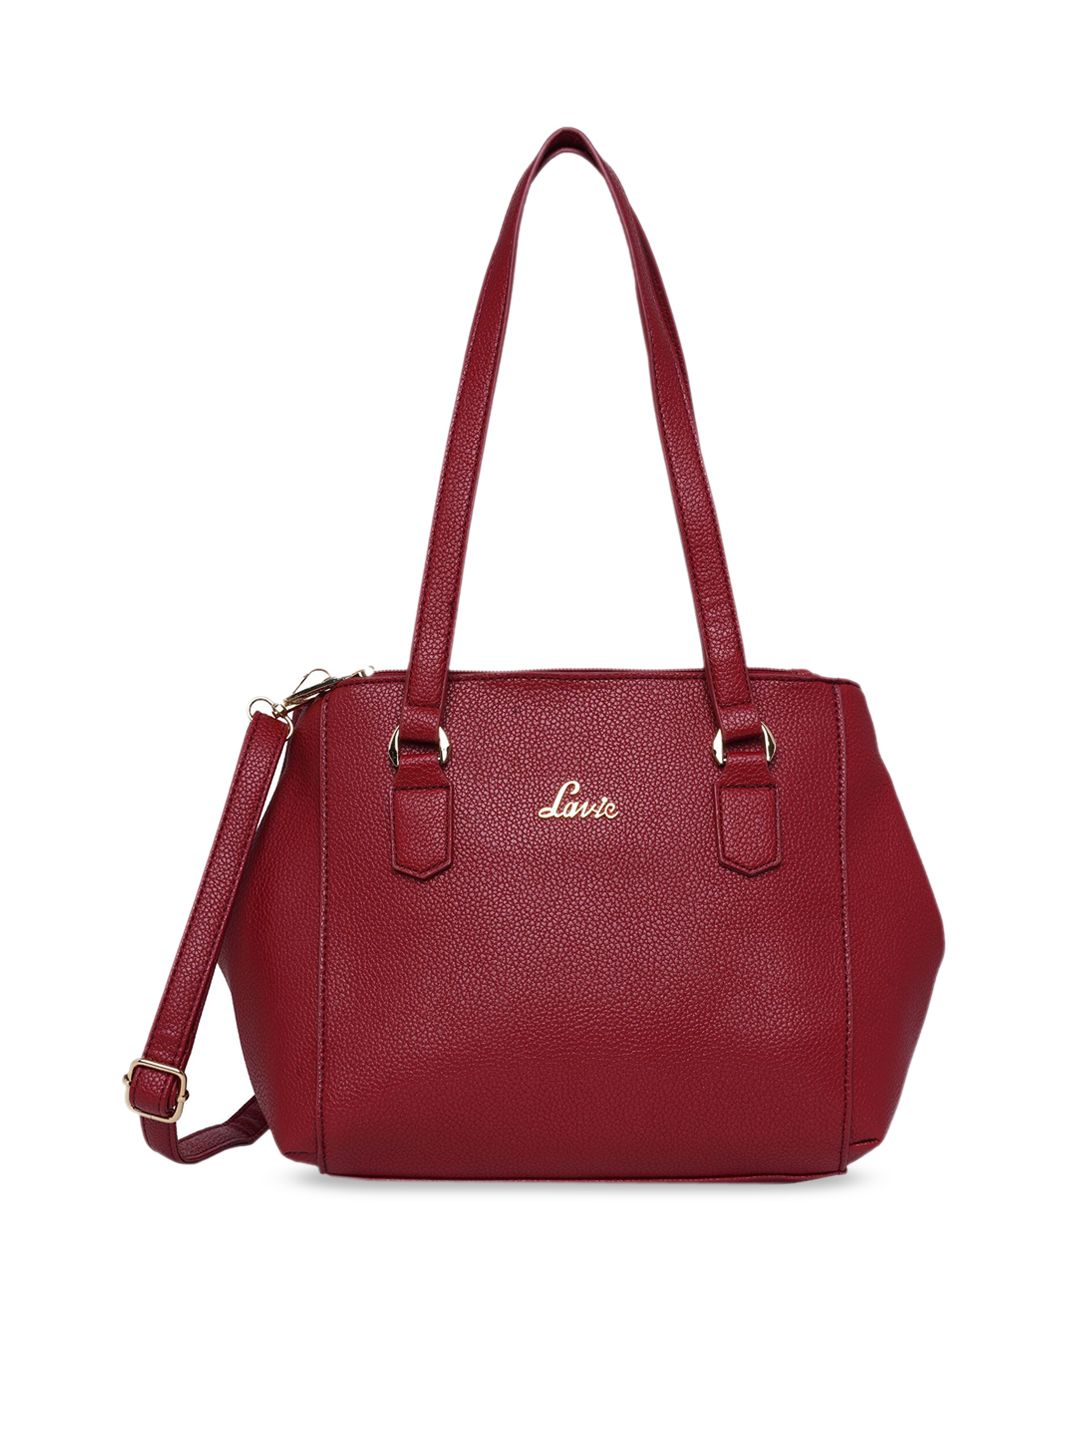 Lavie Red Structured Shoulder Bag Price in India